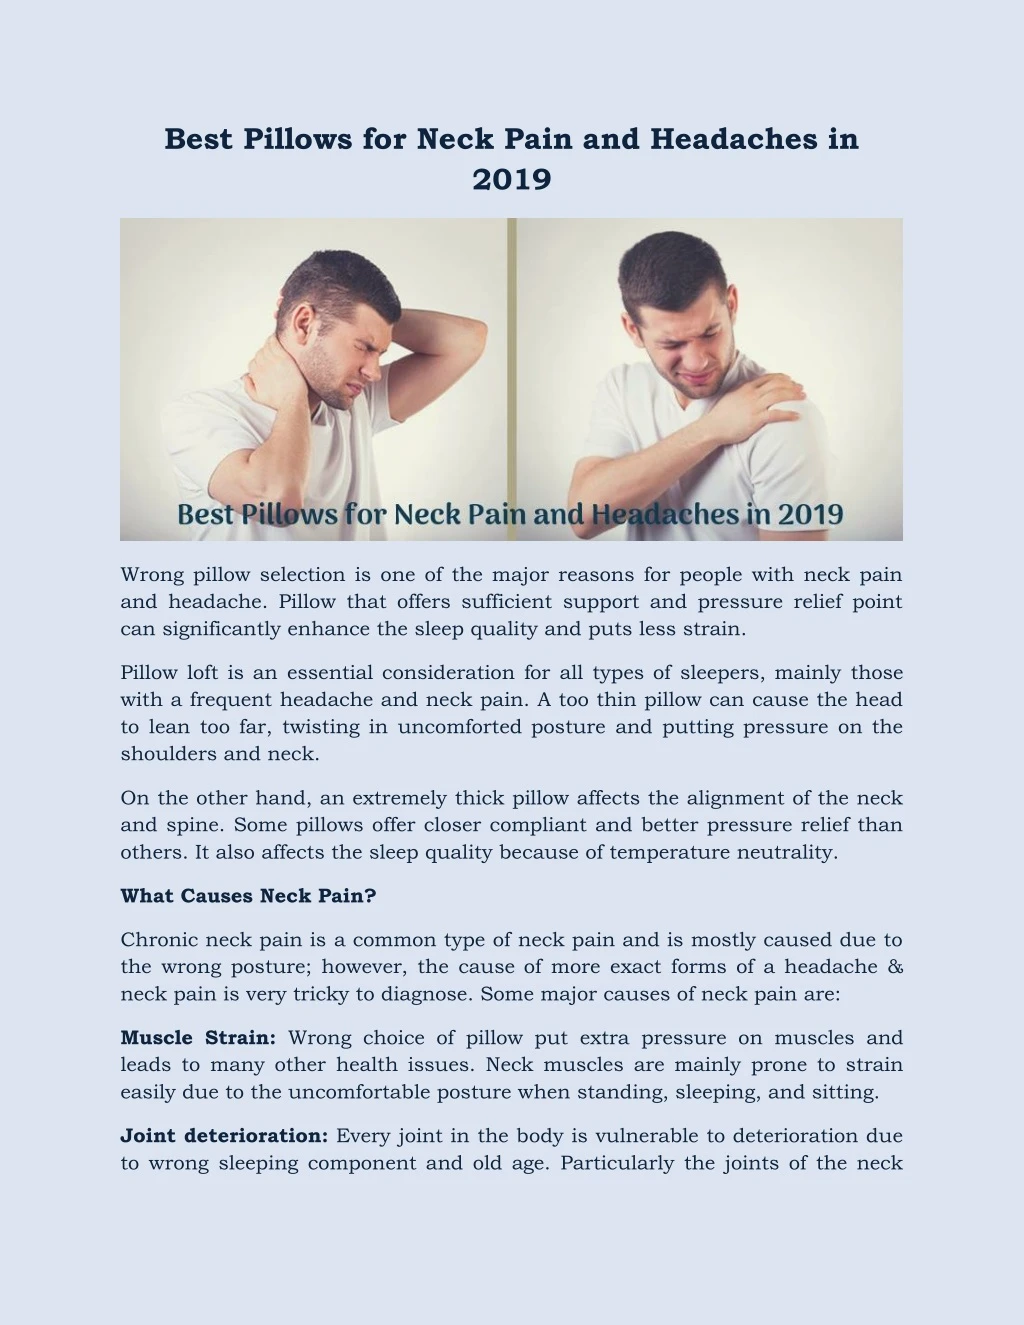 best pillows for neck pain and headaches in 2019